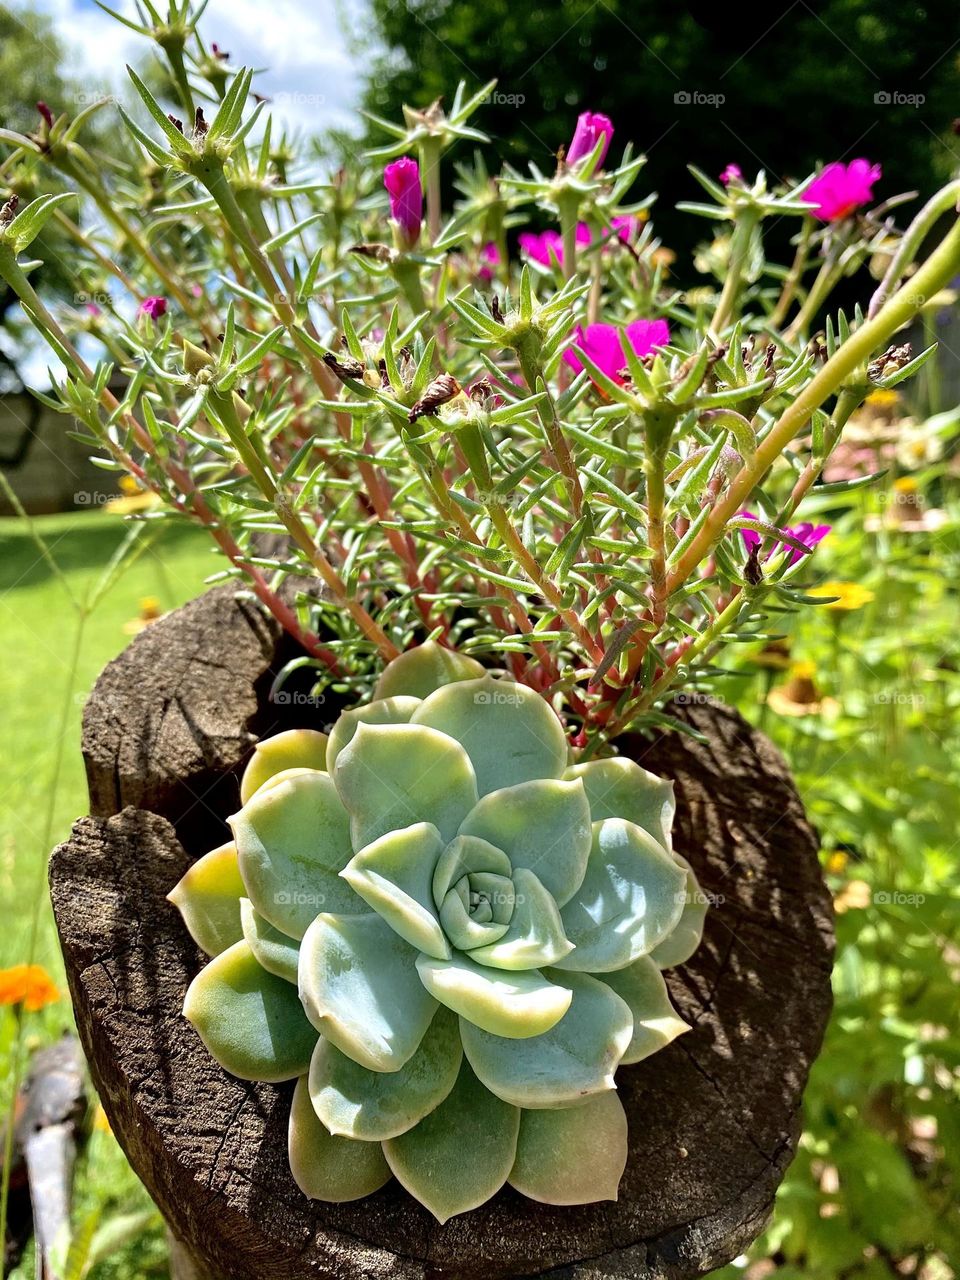 Succulent growing out of a tree stump